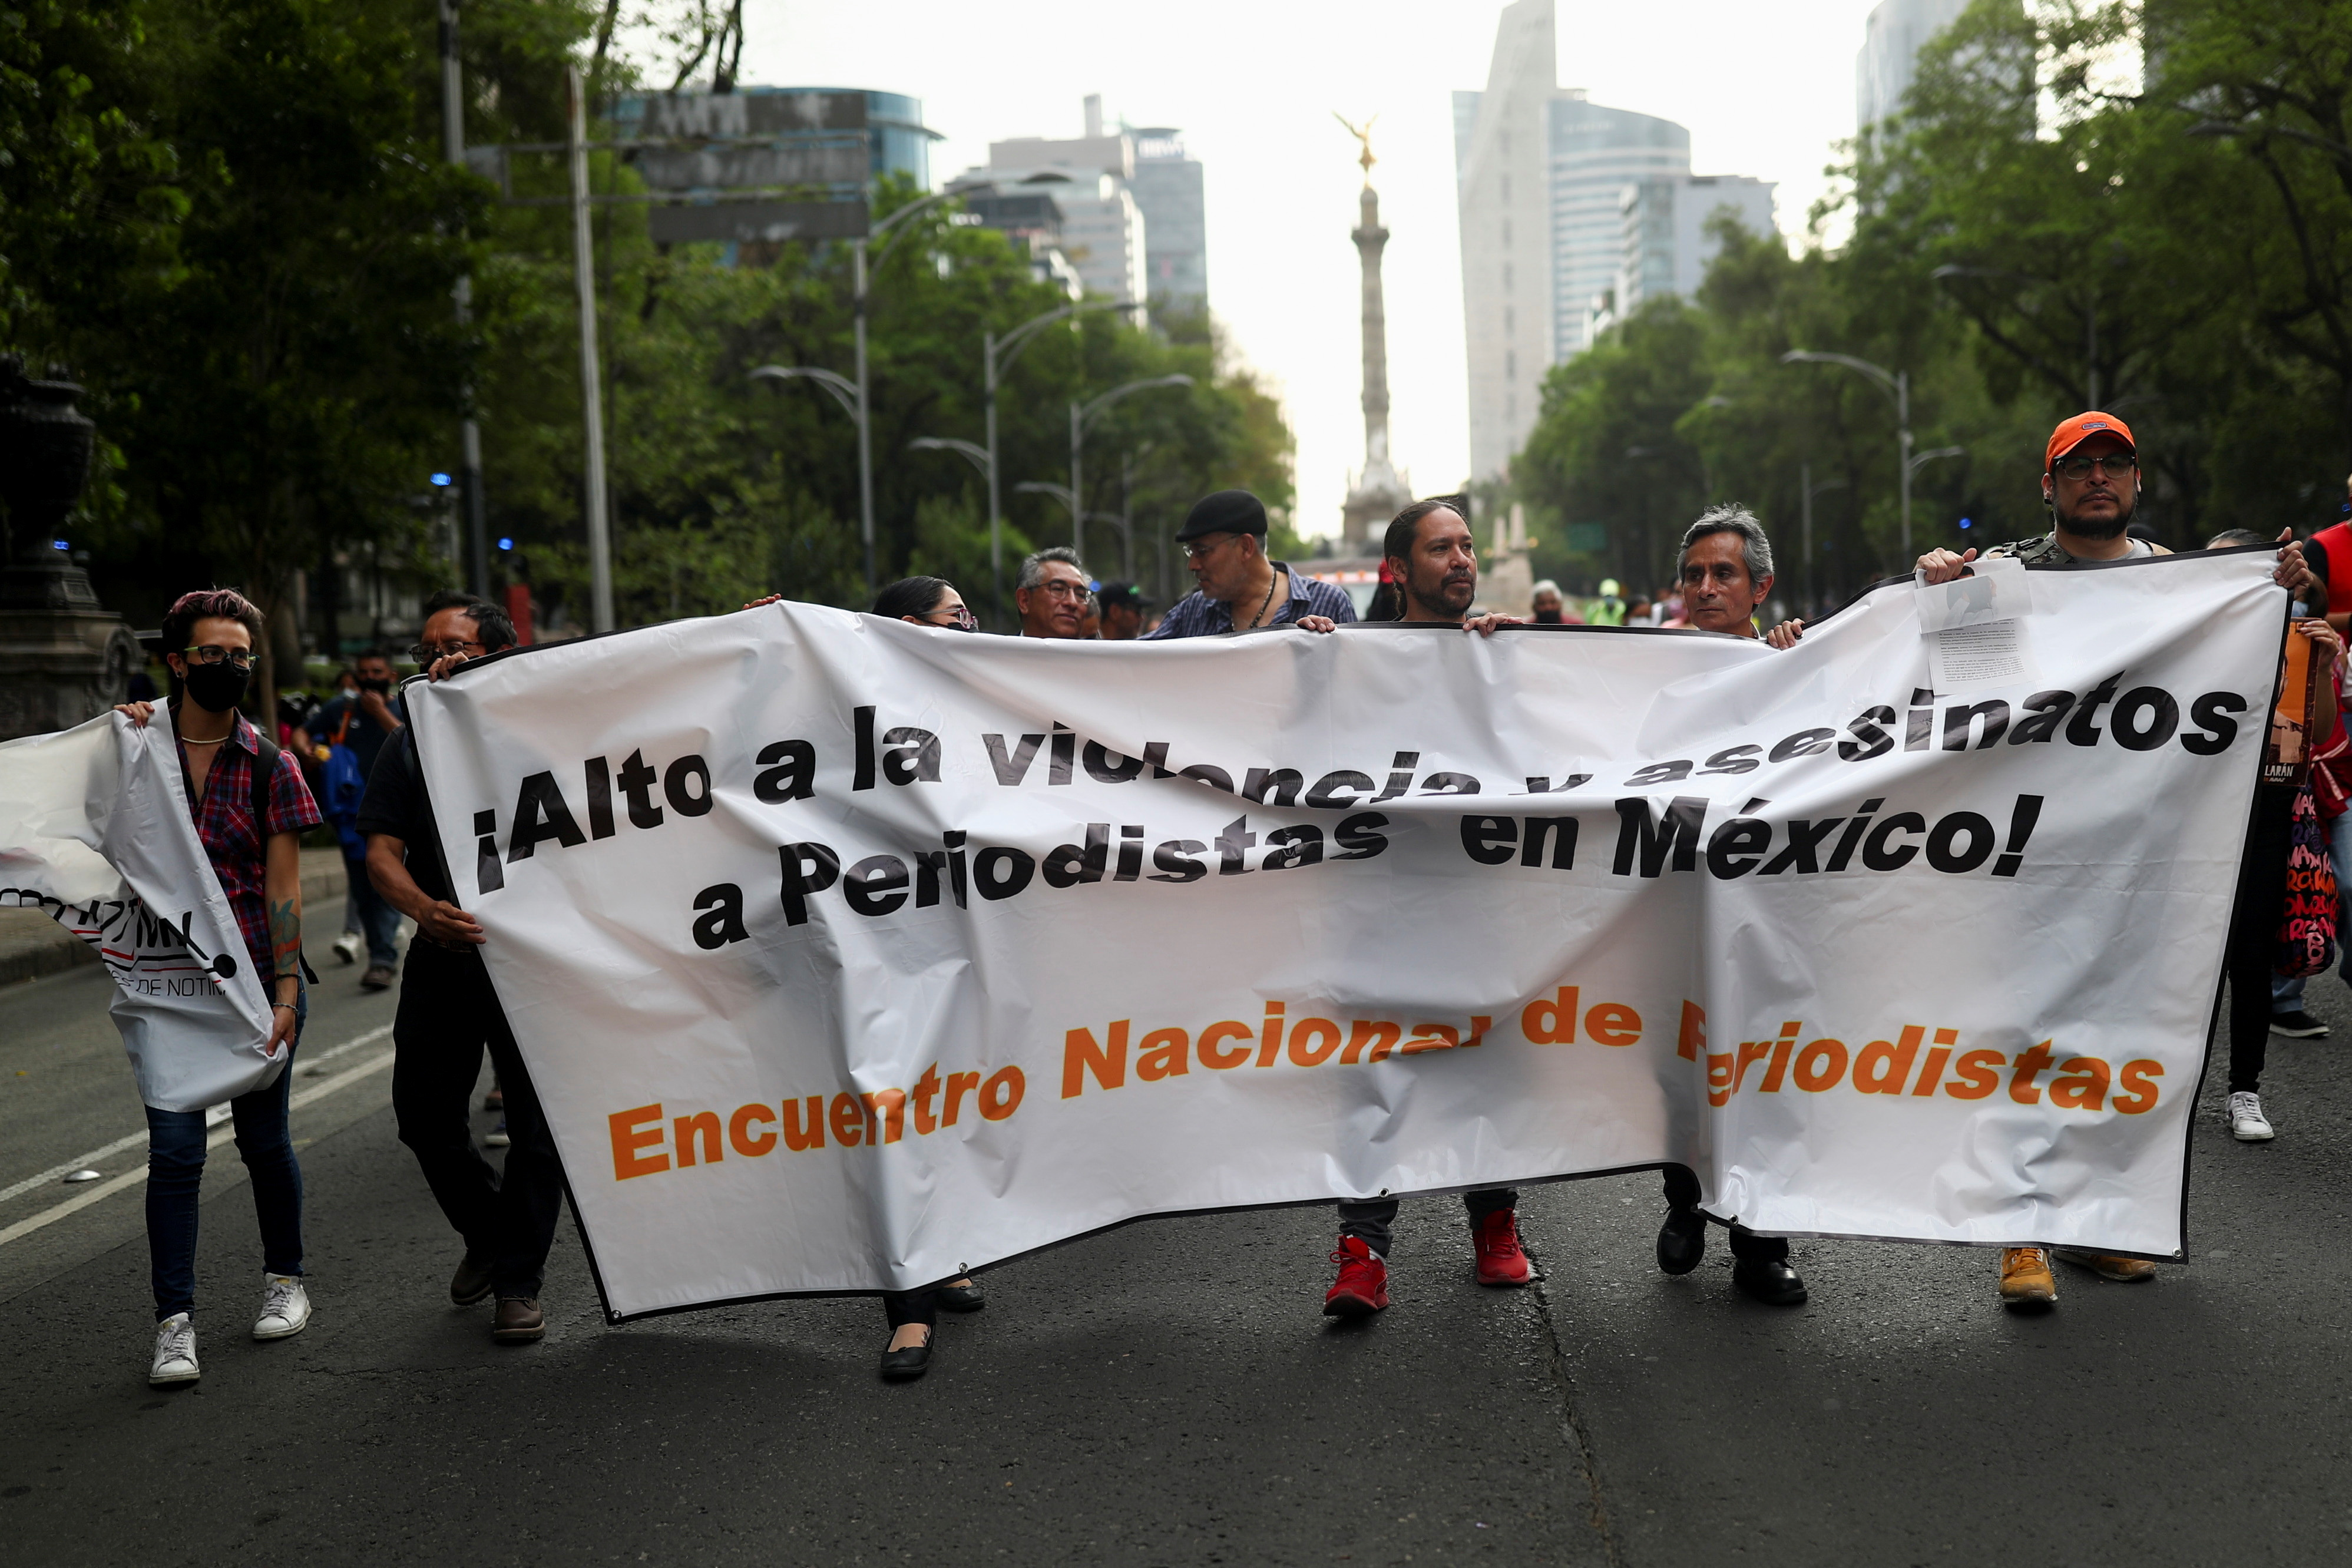 Demonstration to protest against the murder of journalists in Mexico